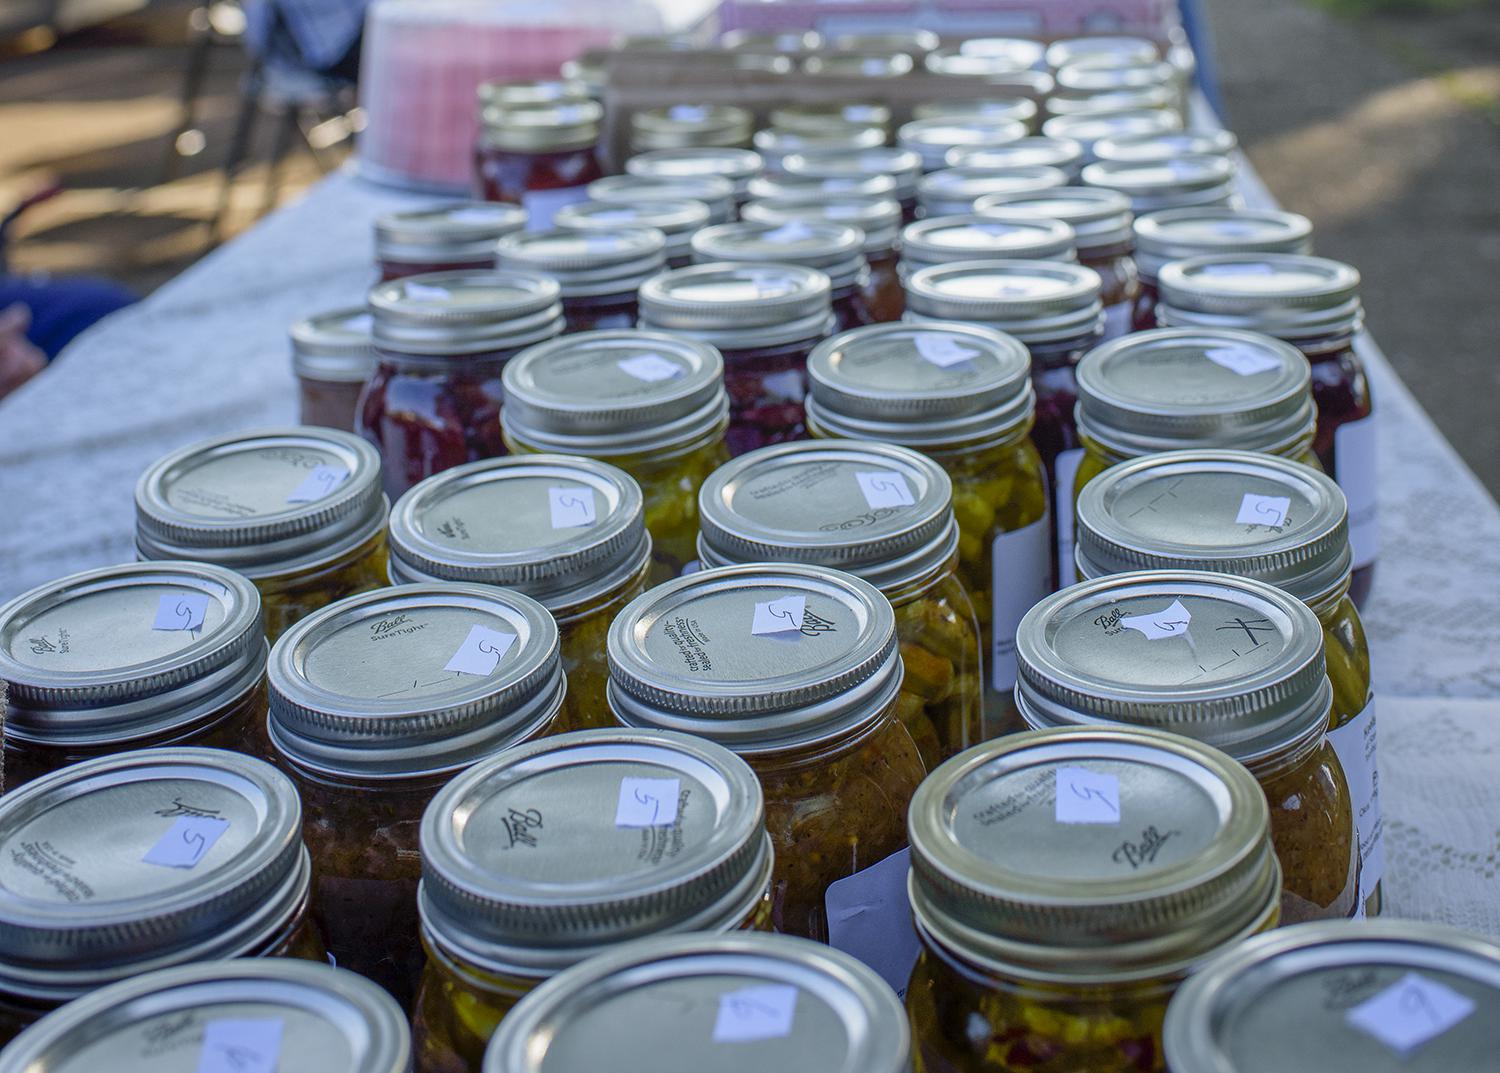 Rows of canning jars line a table at an open-air marketplace.